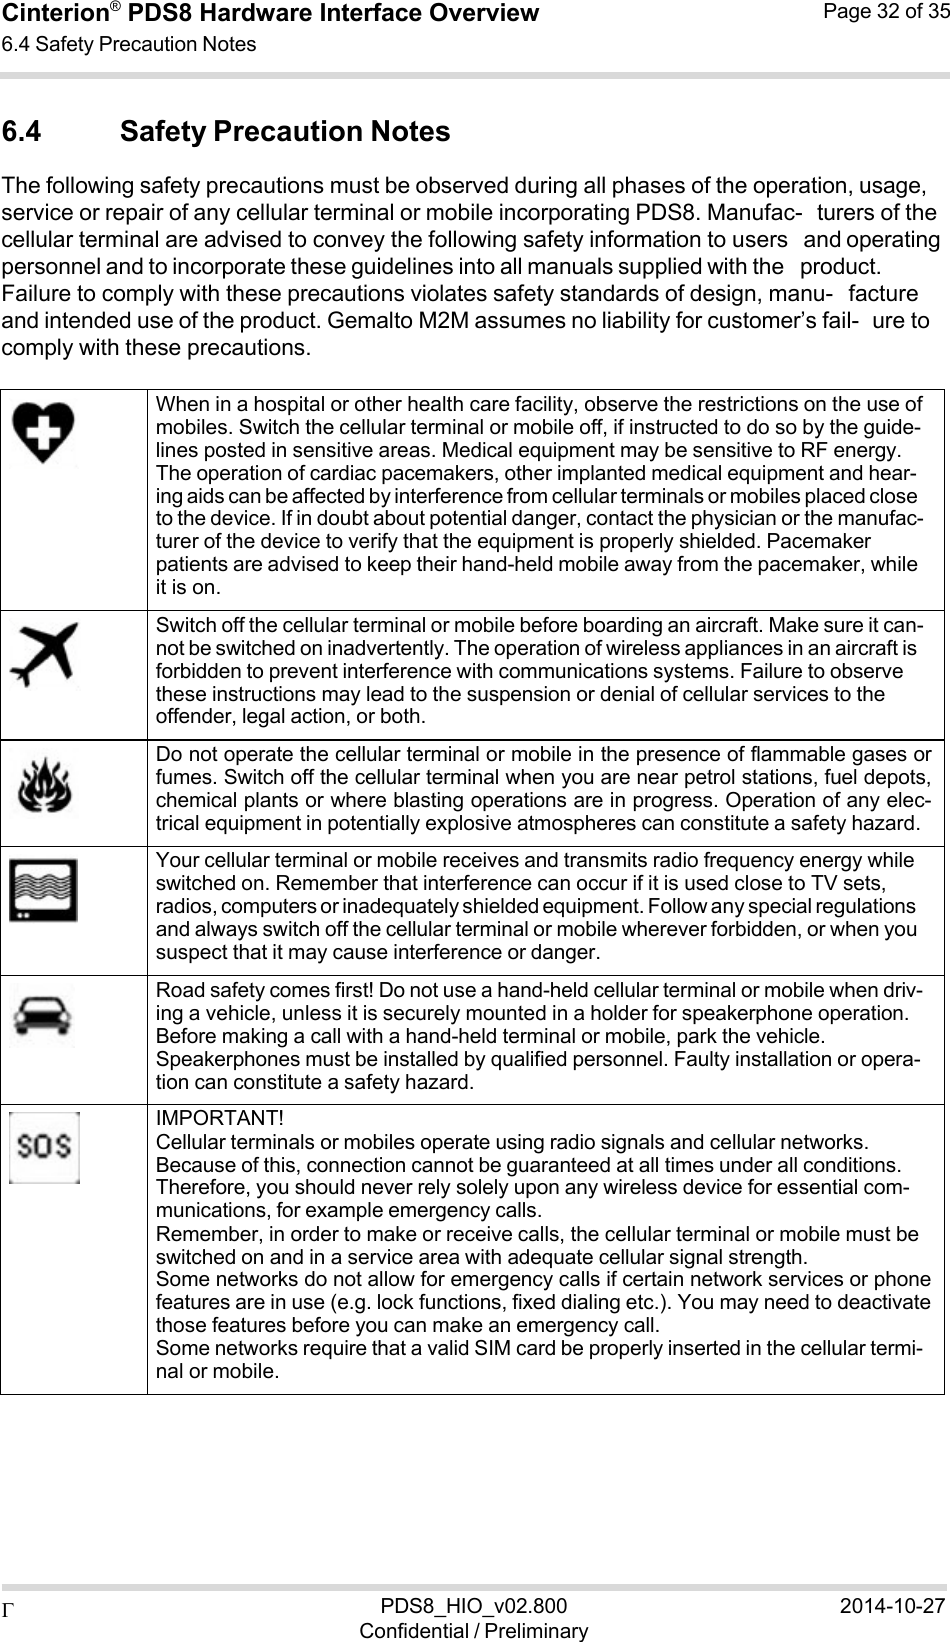  PDS8_HIO_v02.800Confidential / Preliminary2014-10-27Cinterion®  PDS8 Hardware Interface Overview 6.4 Safety Precaution Notes Page 32 of 35   6.4 Safety Precaution Notes The following safety precautions must be observed during all phases of the operation, usage, service or repair of any cellular terminal or mobile incorporating PDS8. Manufac- turers of the cellular terminal are advised to convey the following safety information to users and operating personnel and to incorporate these guidelines into all manuals supplied with the product. Failure to comply with these precautions violates safety standards of design, manu- facture and intended use of the product. Gemalto M2M assumes no liability for customer’s fail- ure to comply with these precautions.         When in a hospital or other health care facility, observe the restrictions on the use of mobiles. Switch the cellular terminal or mobile off, if instructed to do so by the guide- lines posted in sensitive areas. Medical equipment may be sensitive to RF energy. The operation of cardiac pacemakers, other implanted medical equipment and hear- ing aids can be affected by interference from cellular terminals or mobiles placed close to the device. If in doubt about potential danger, contact the physician or the manufac- turer of the device to verify that the equipment is properly shielded. Pacemaker patients are advised to keep their hand-held mobile away from the pacemaker, while it is on.     Switch off the cellular terminal or mobile before boarding an aircraft. Make sure it can- not be switched on inadvertently. The operation of wireless appliances in an aircraft is forbidden to prevent interference with communications systems. Failure to observe these instructions may lead to the suspension or denial of cellular services to the offender, legal action, or both.    Do not operate the cellular terminal or mobile in the presence of flammable gases orfumes. Switch off the cellular terminal when you are near petrol stations, fuel depots,chemical plants or where blasting operations are in progress. Operation of any elec-trical equipment in potentially explosive atmospheres can constitute a safety hazard.     Your cellular terminal or mobile receives and transmits radio frequency energy while switched on. Remember that interference can occur if it is used close to TV sets, radios, computers or inadequately shielded equipment. Follow any special regulations and always switch off the cellular terminal or mobile wherever forbidden, or when you suspect that it may cause interference or danger.     Road safety comes first! Do not use a hand-held cellular terminal or mobile when driv- ing a vehicle, unless it is securely mounted in a holder for speakerphone operation. Before making a call with a hand-held terminal or mobile, park the vehicle. Speakerphones must be installed by qualified personnel. Faulty installation or opera- tion can constitute a safety hazard.           IMPORTANT! Cellular terminals or mobiles operate using radio signals and cellular networks. Because of this, connection cannot be guaranteed at all times under all conditions. Therefore, you should never rely solely upon any wireless device for essential com- munications, for example emergency calls. Remember, in order to make or receive calls, the cellular terminal or mobile must be switched on and in a service area with adequate cellular signal strength. Some networks do not allow for emergency calls if certain network services or phonefeatures are in use (e.g. lock functions, fixed dialing etc.). You may need to deactivatethose features before you can make an emergency call. Some networks require that a valid SIM card be properly inserted in the cellular termi- nal or mobile. 